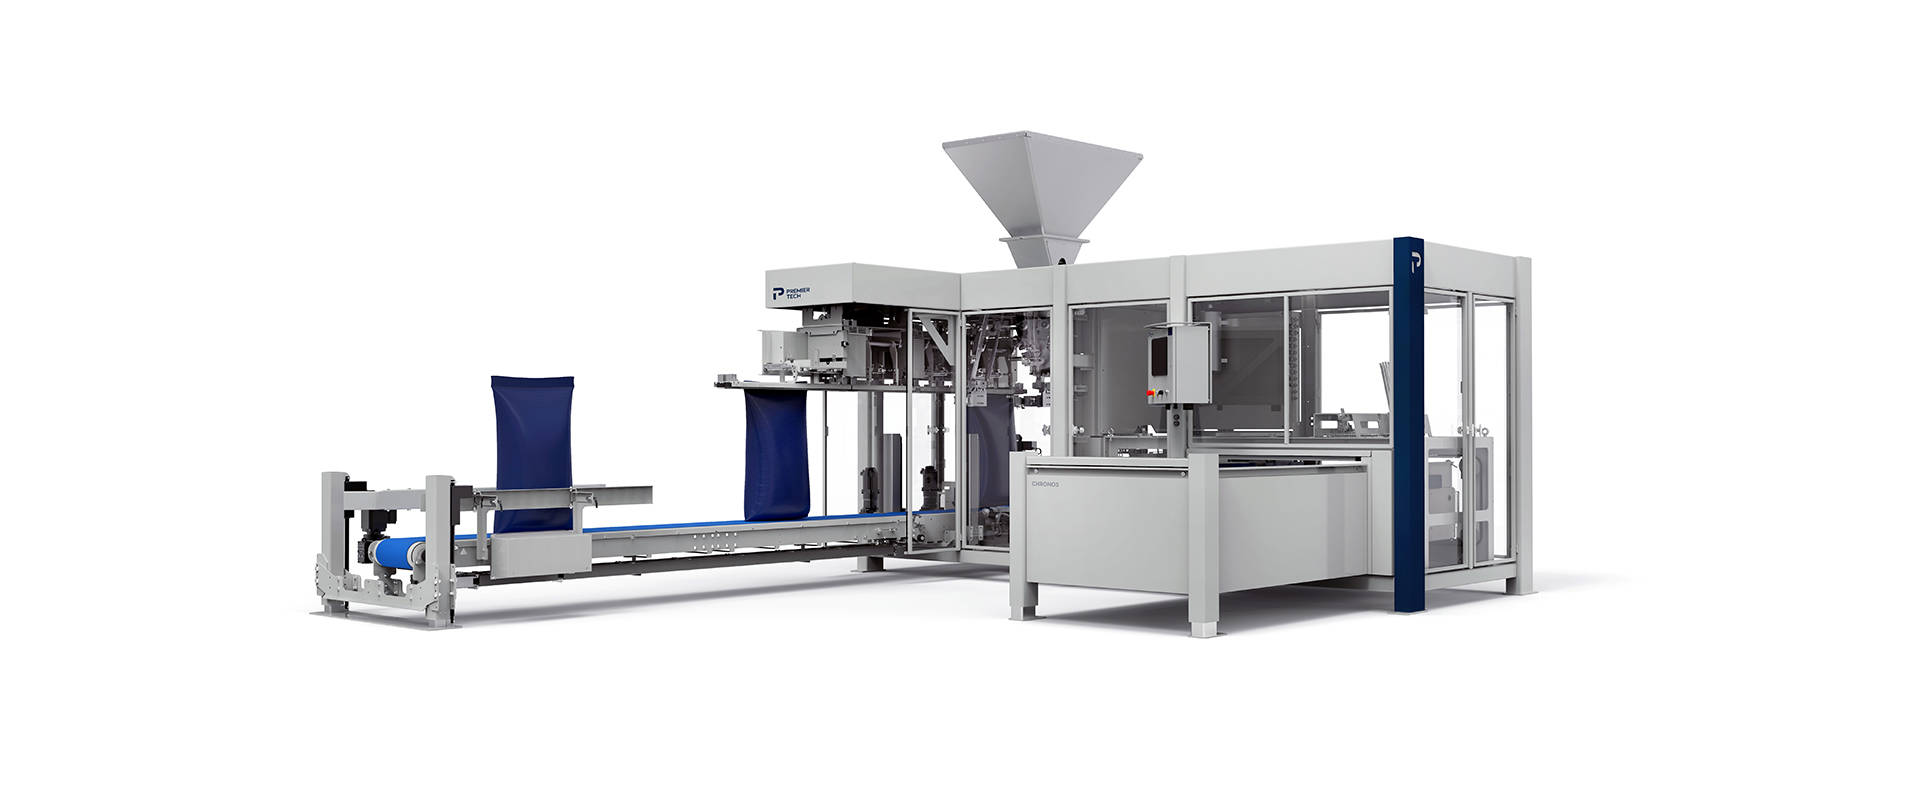 Umailer Automatic Bagging Sealing Machine Manufacturer, Auto Bagger For Sale